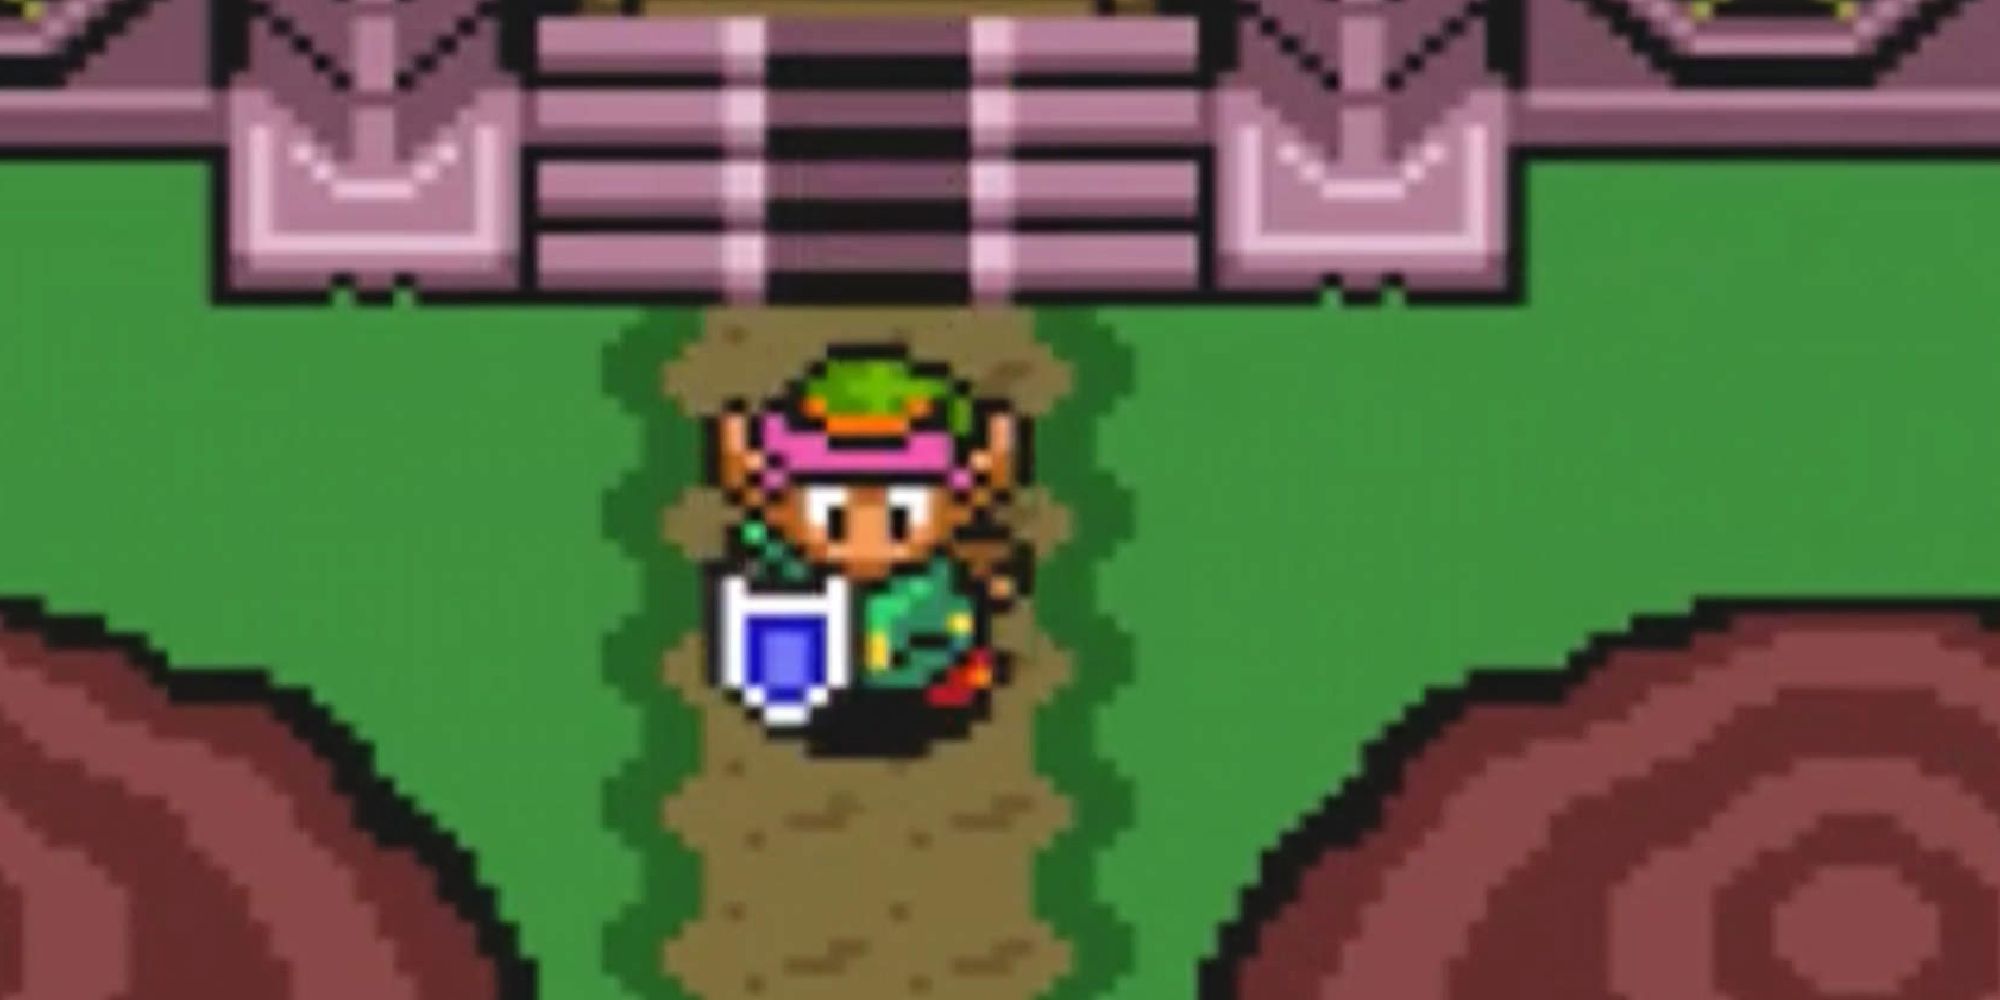 Link in A Link to the Past